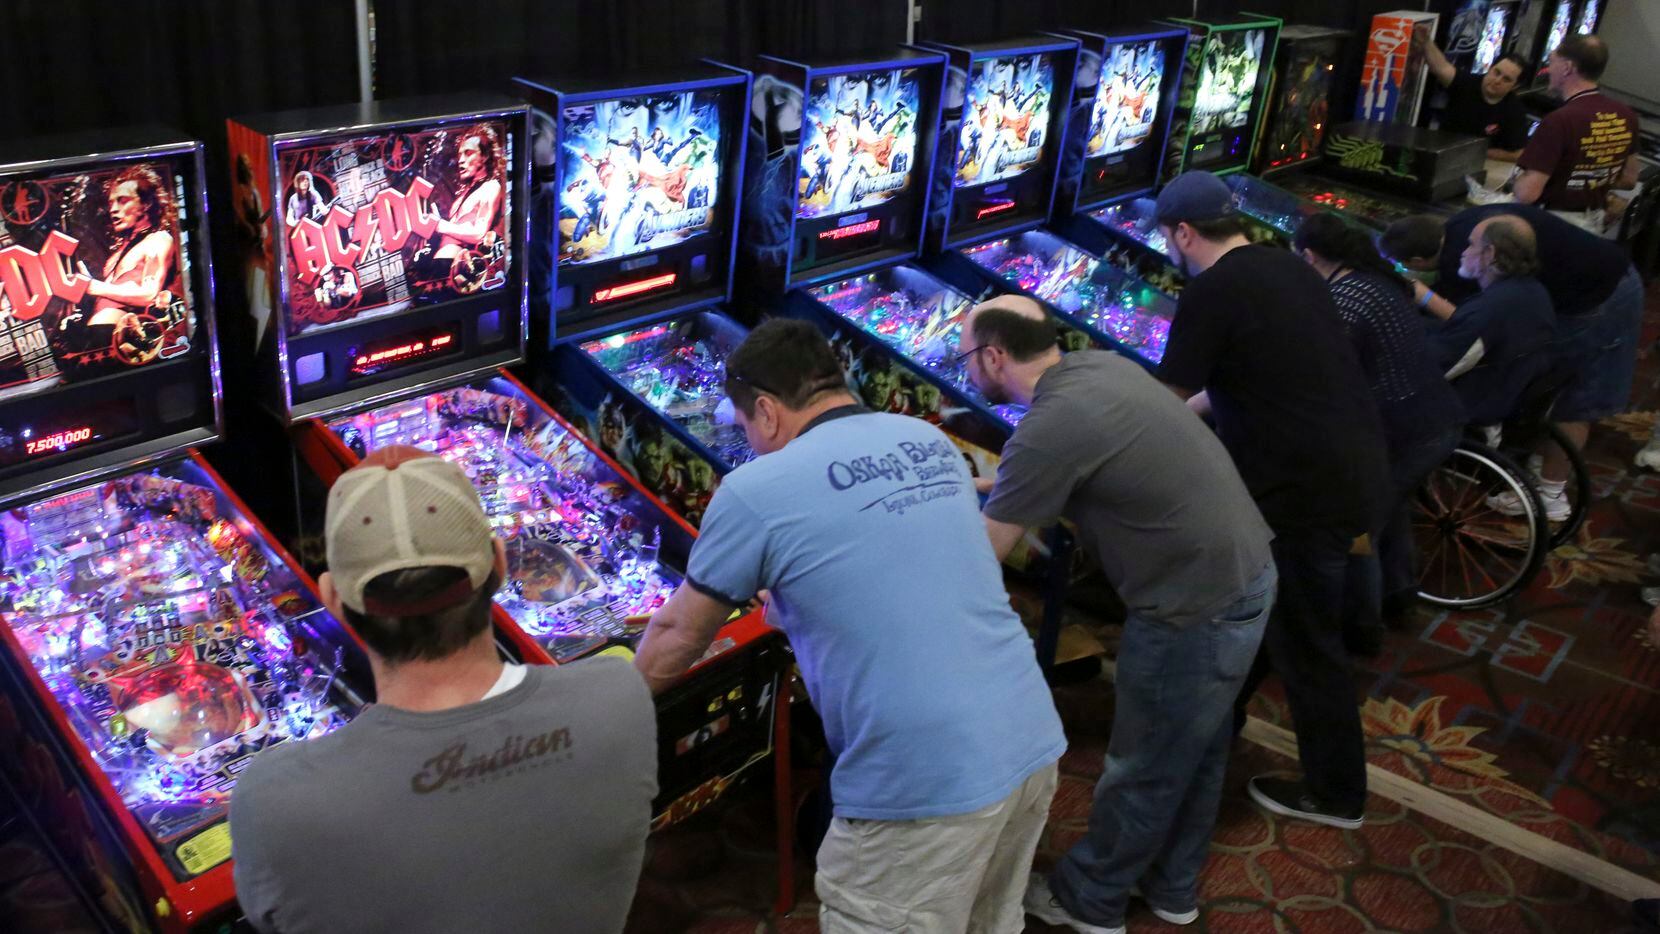 The tournament at the Texas Pinball Festival brought in players from all over the country...